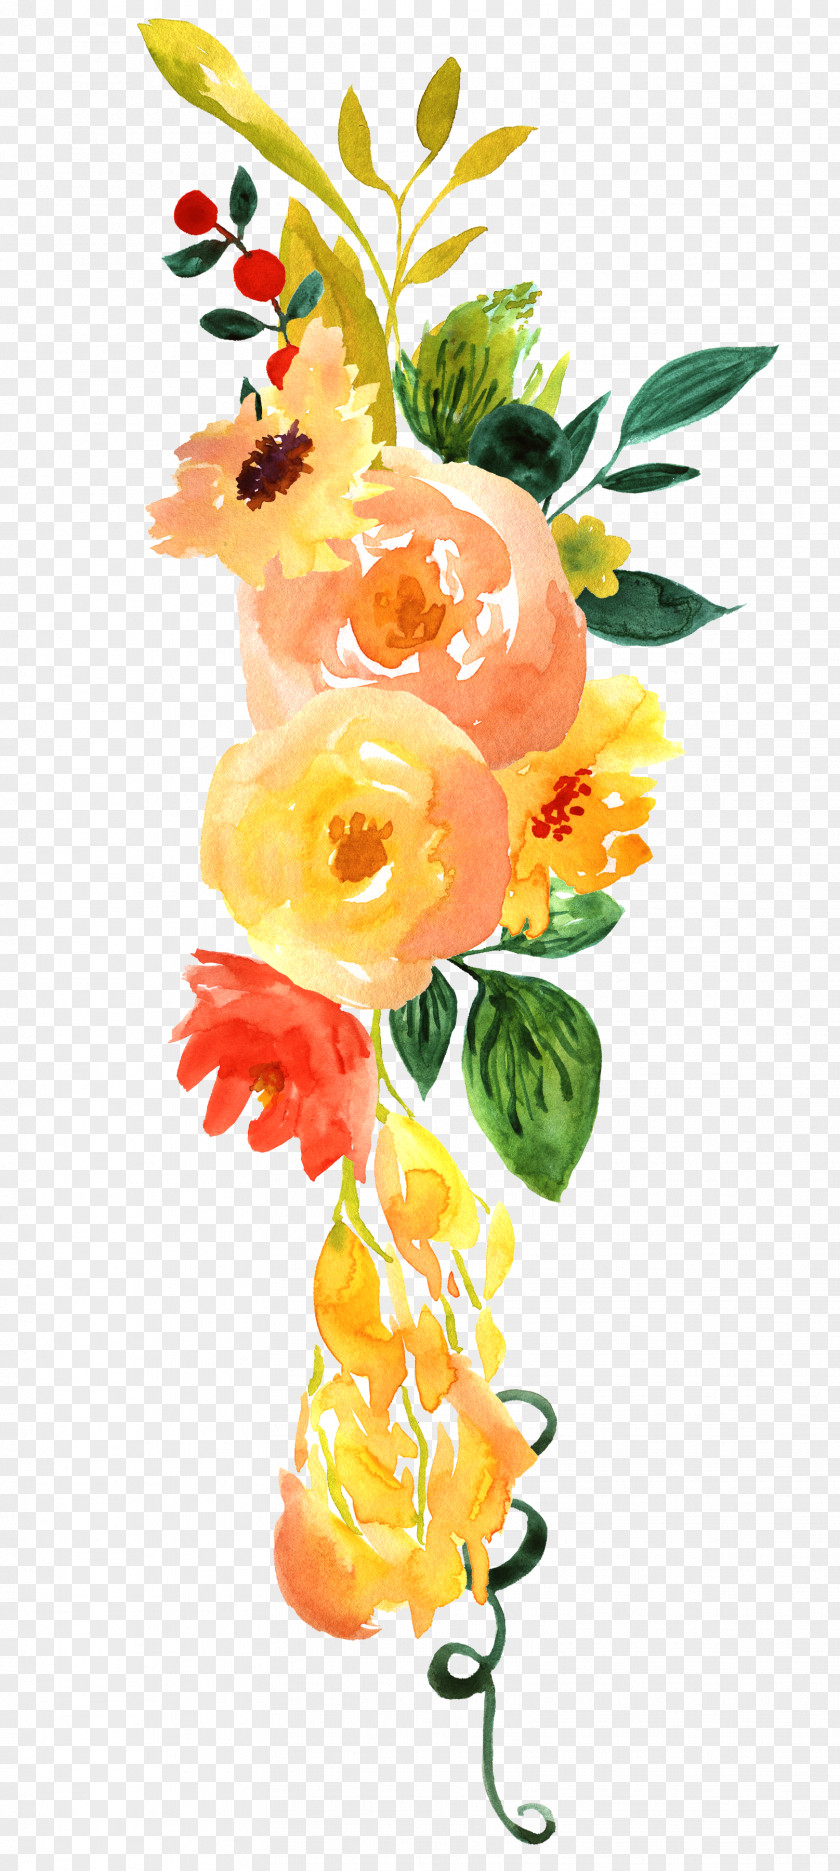 Watercolor Hand Painted Floral Decoration Pattern Design Painting Flower PNG